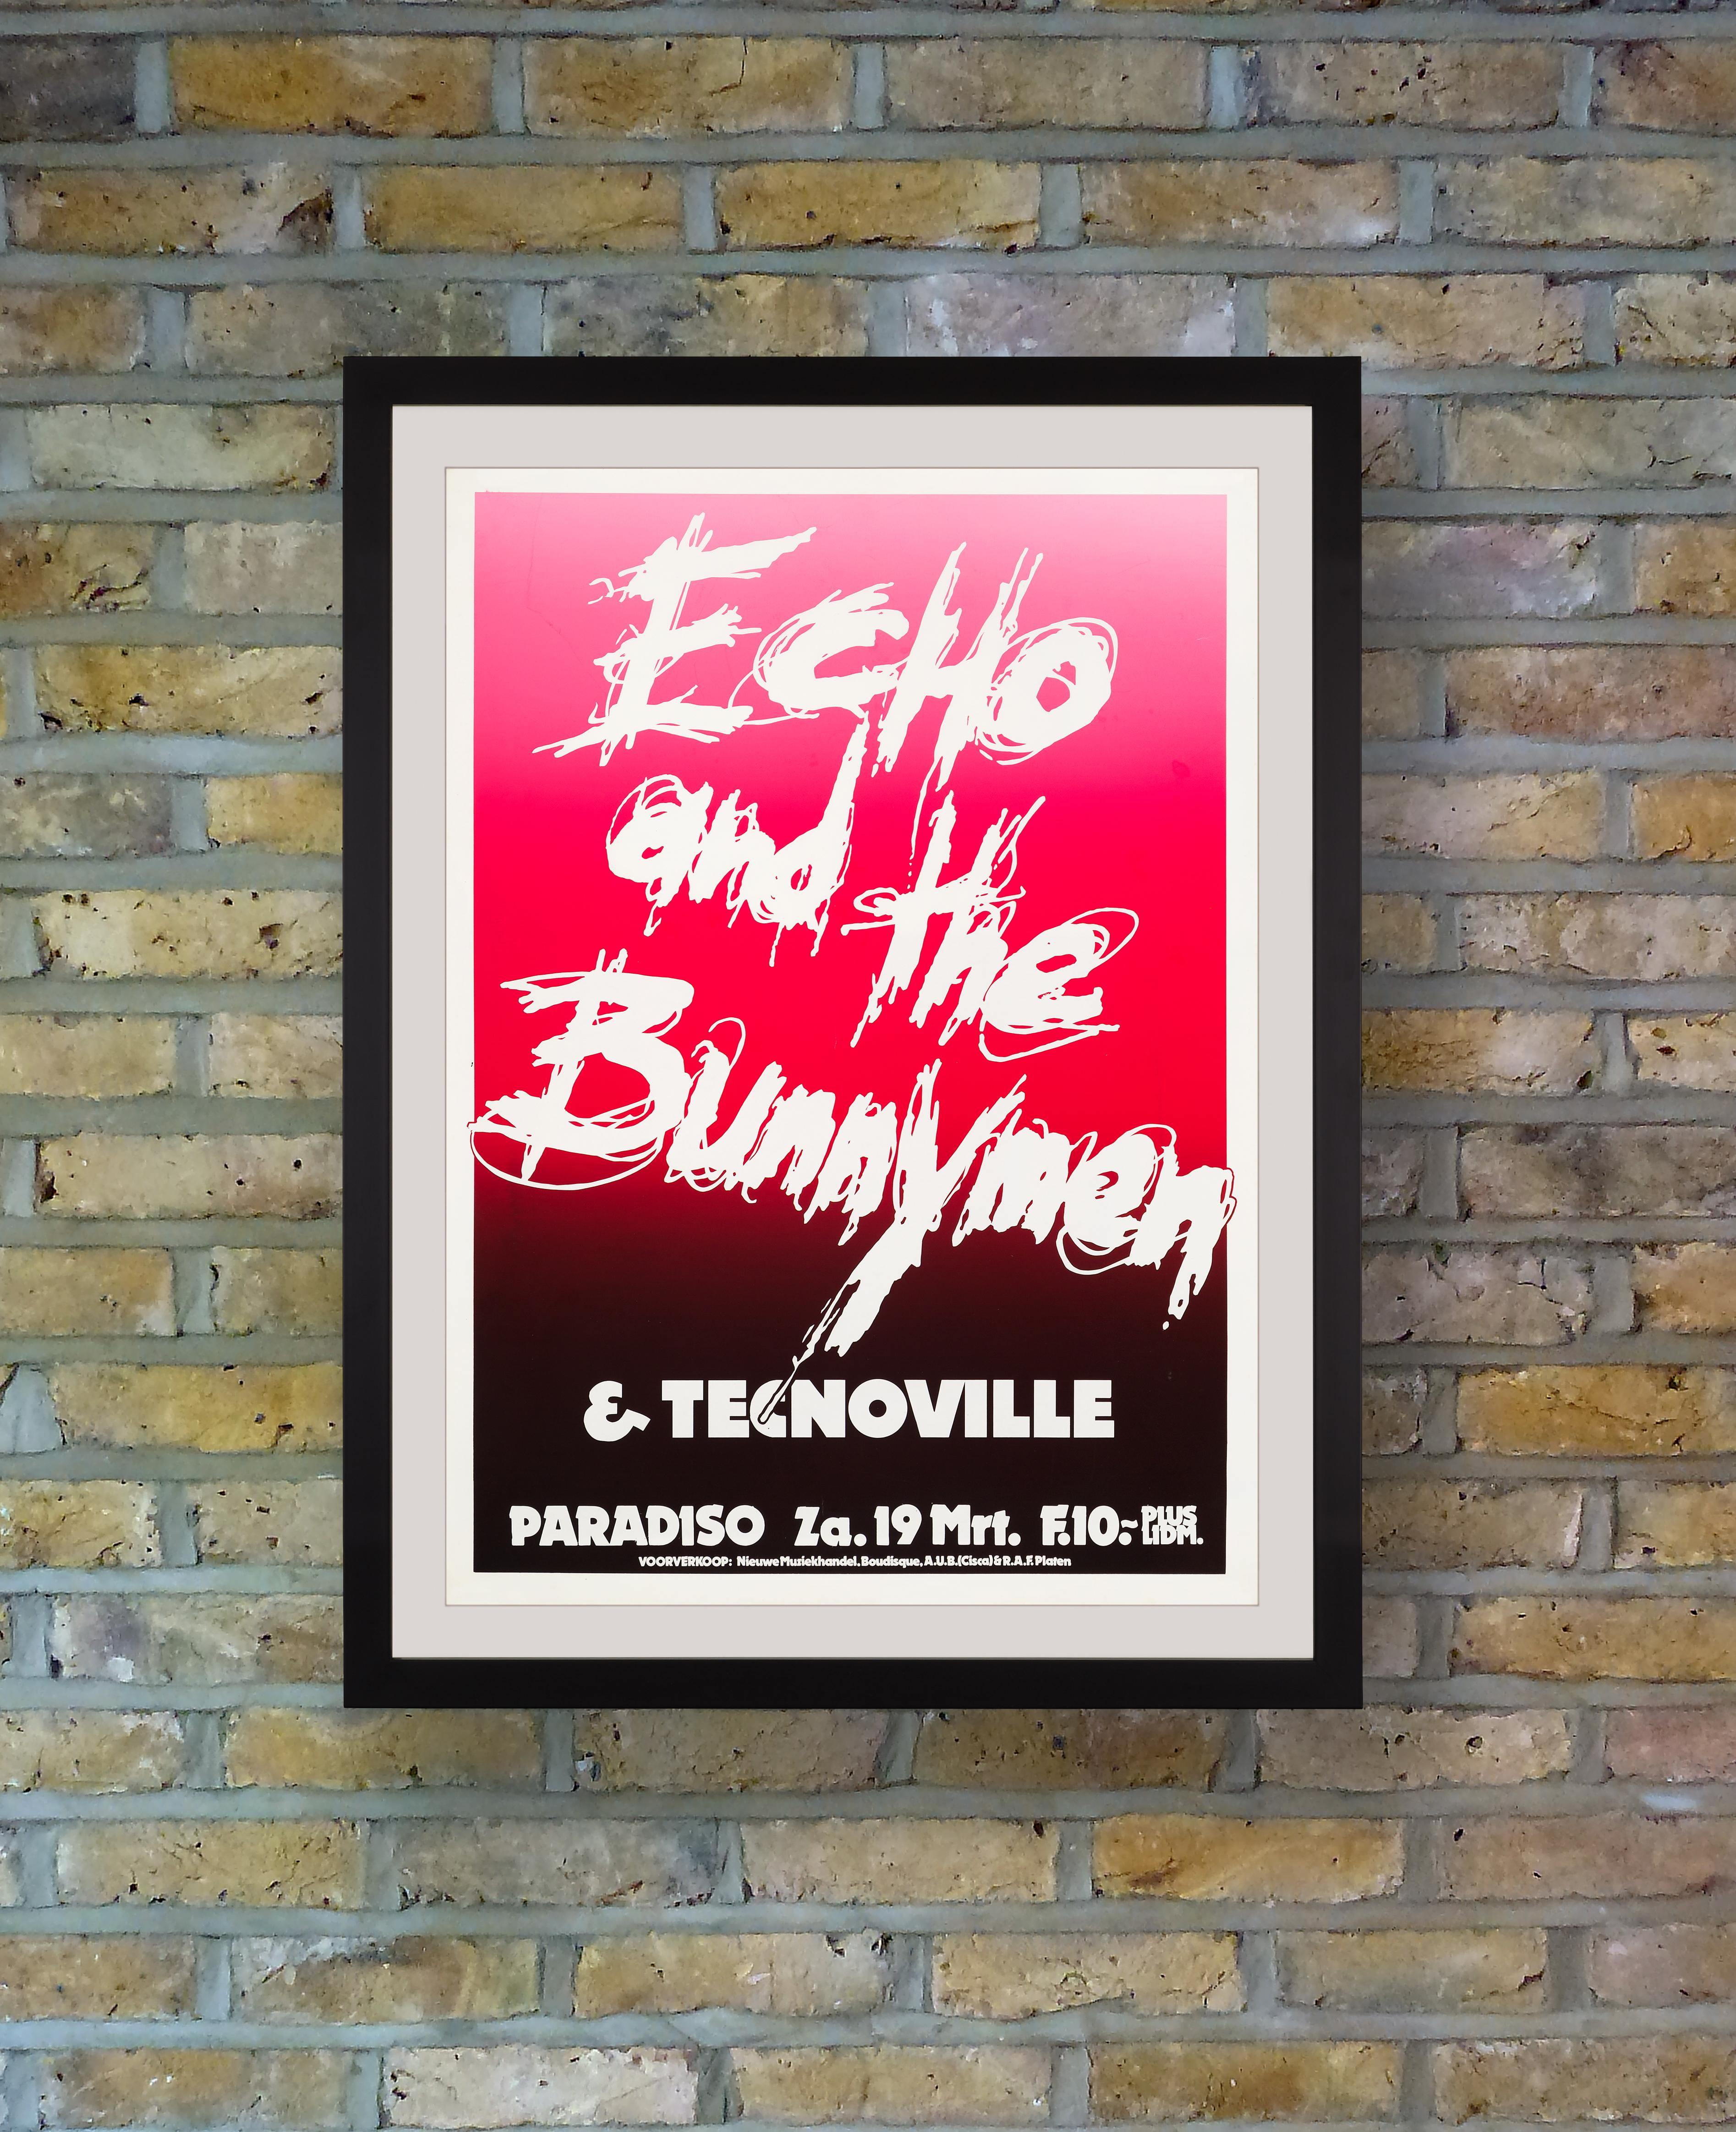 Boldly silkscreen printed in vibrant pink and red inks, this graphic concert poster promoted a performance by Echo & the Bunnymen at the Paradiso Club in Amsterdam on 19th March 1983, during the European leg of their Porcupine Tour. Formed in 1978,